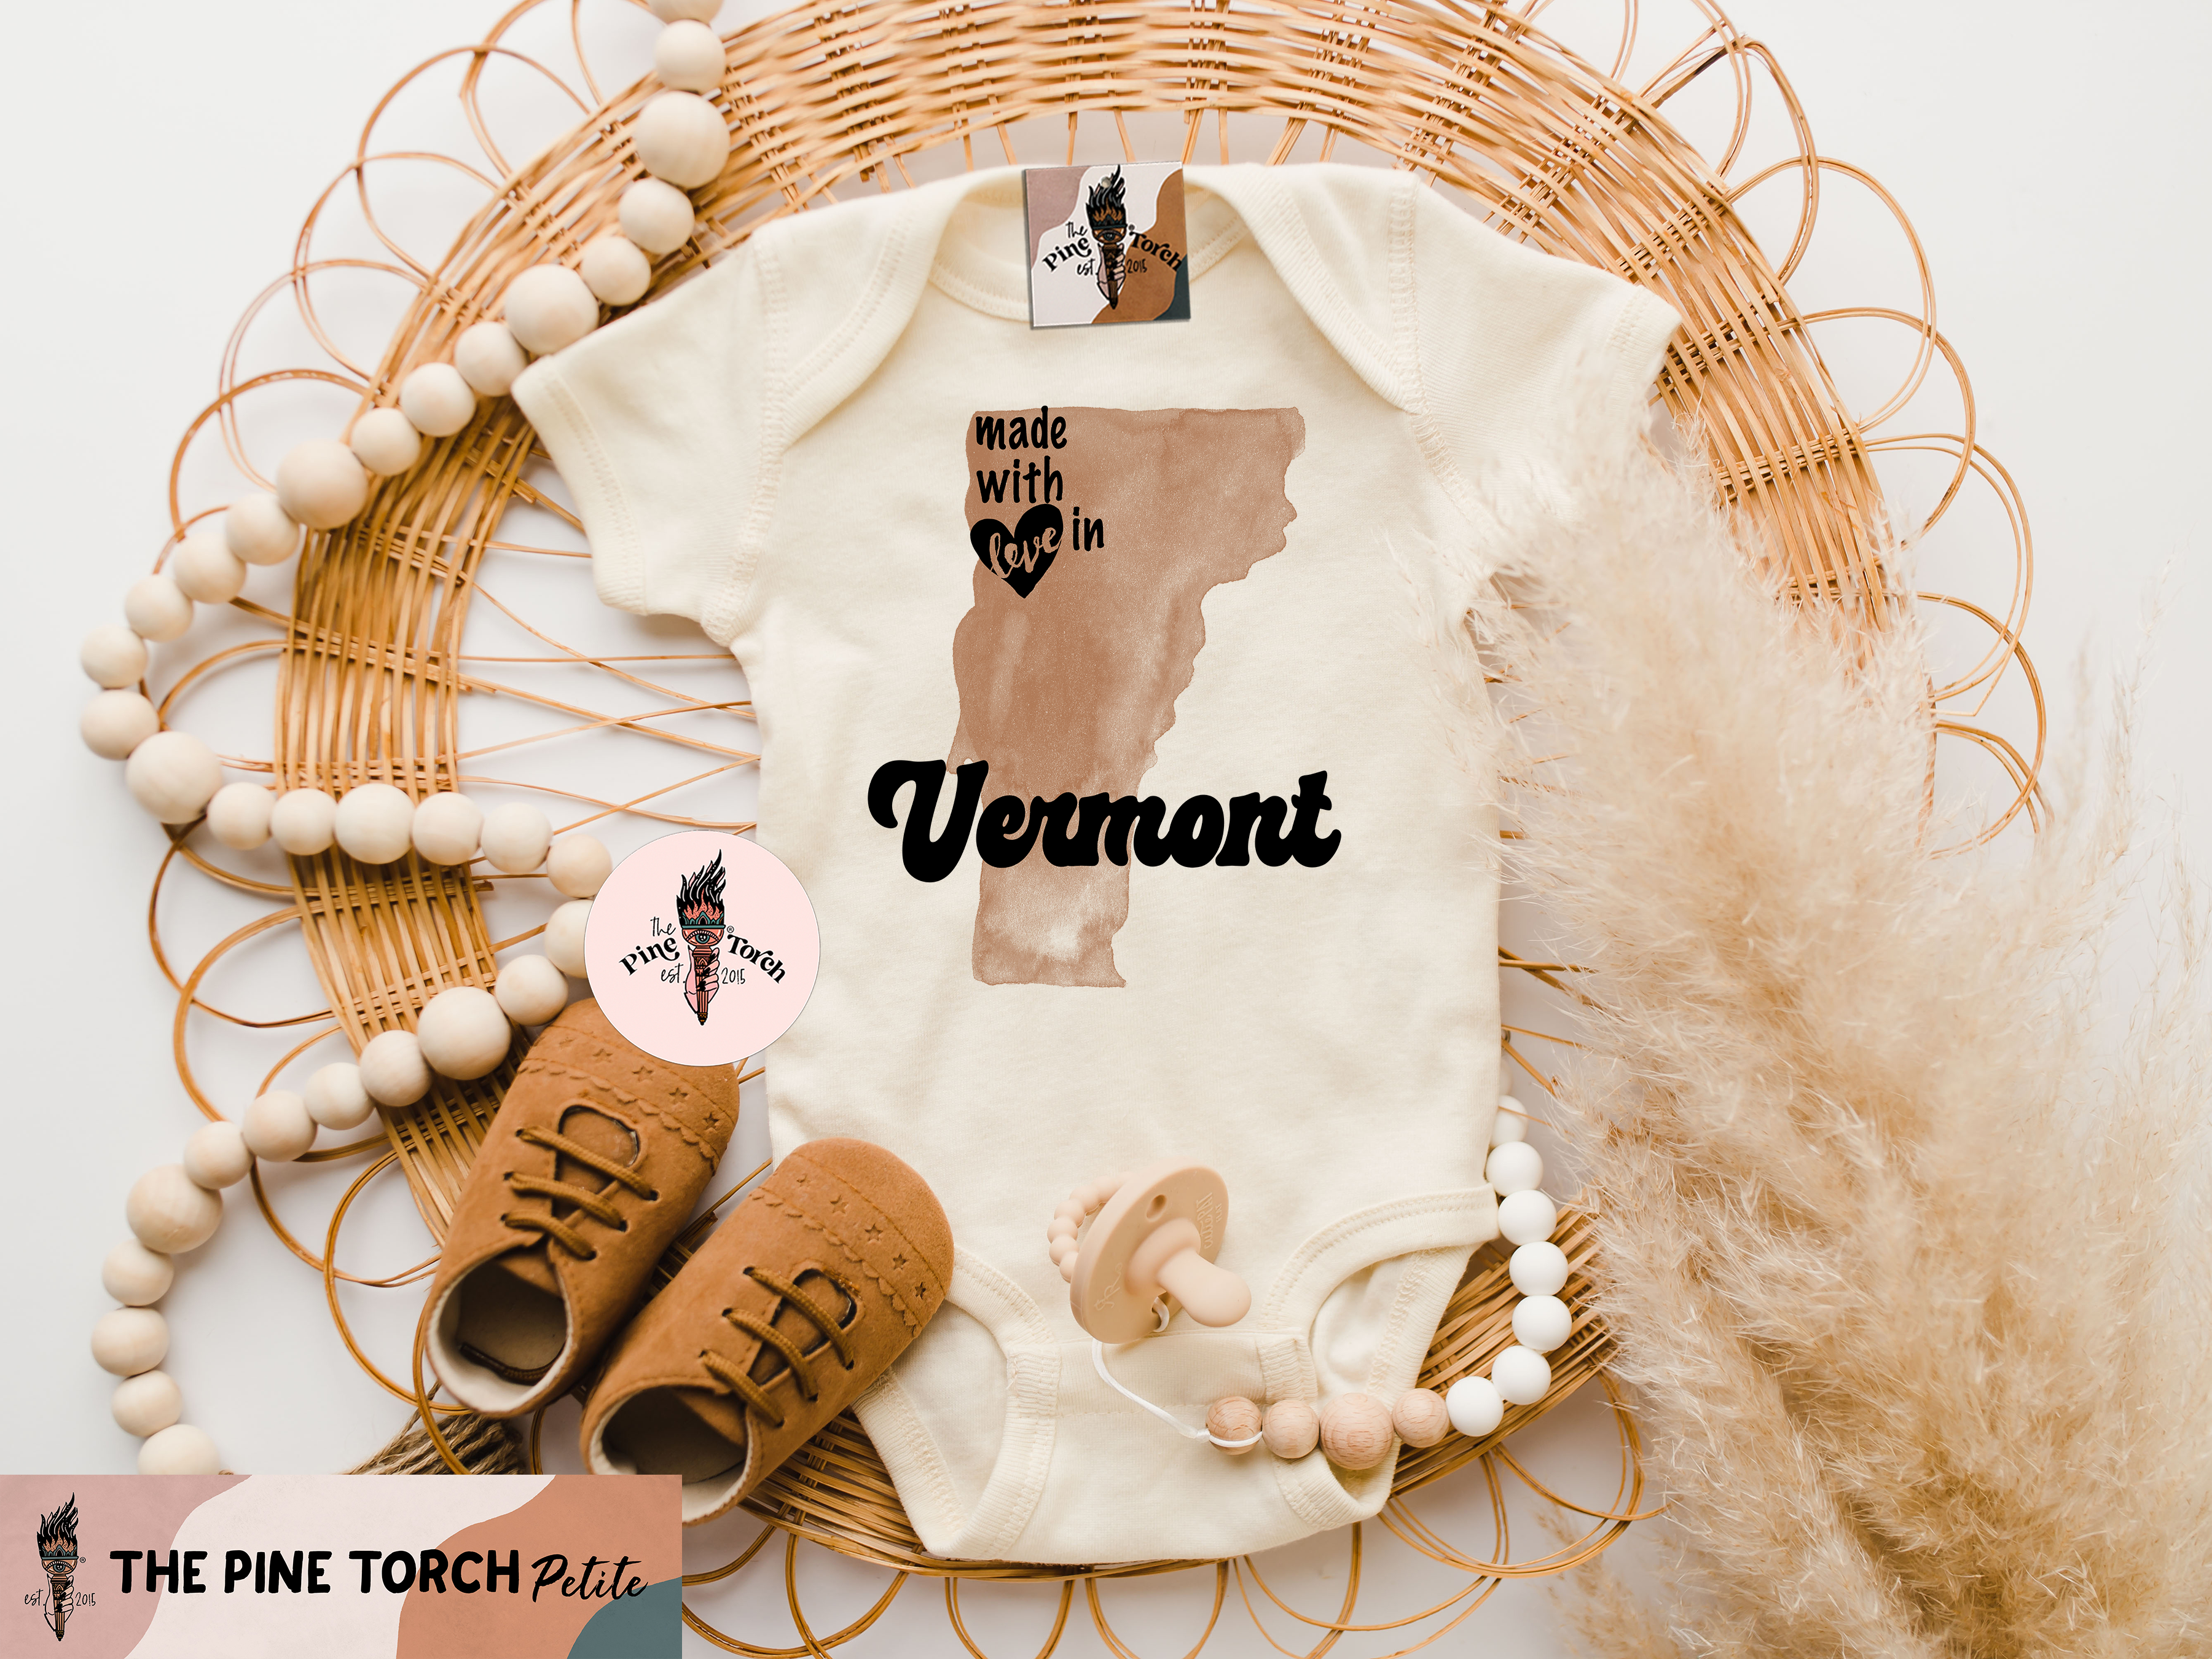 « MADE WITH LOVE IN VERMONT » BODYSUIT